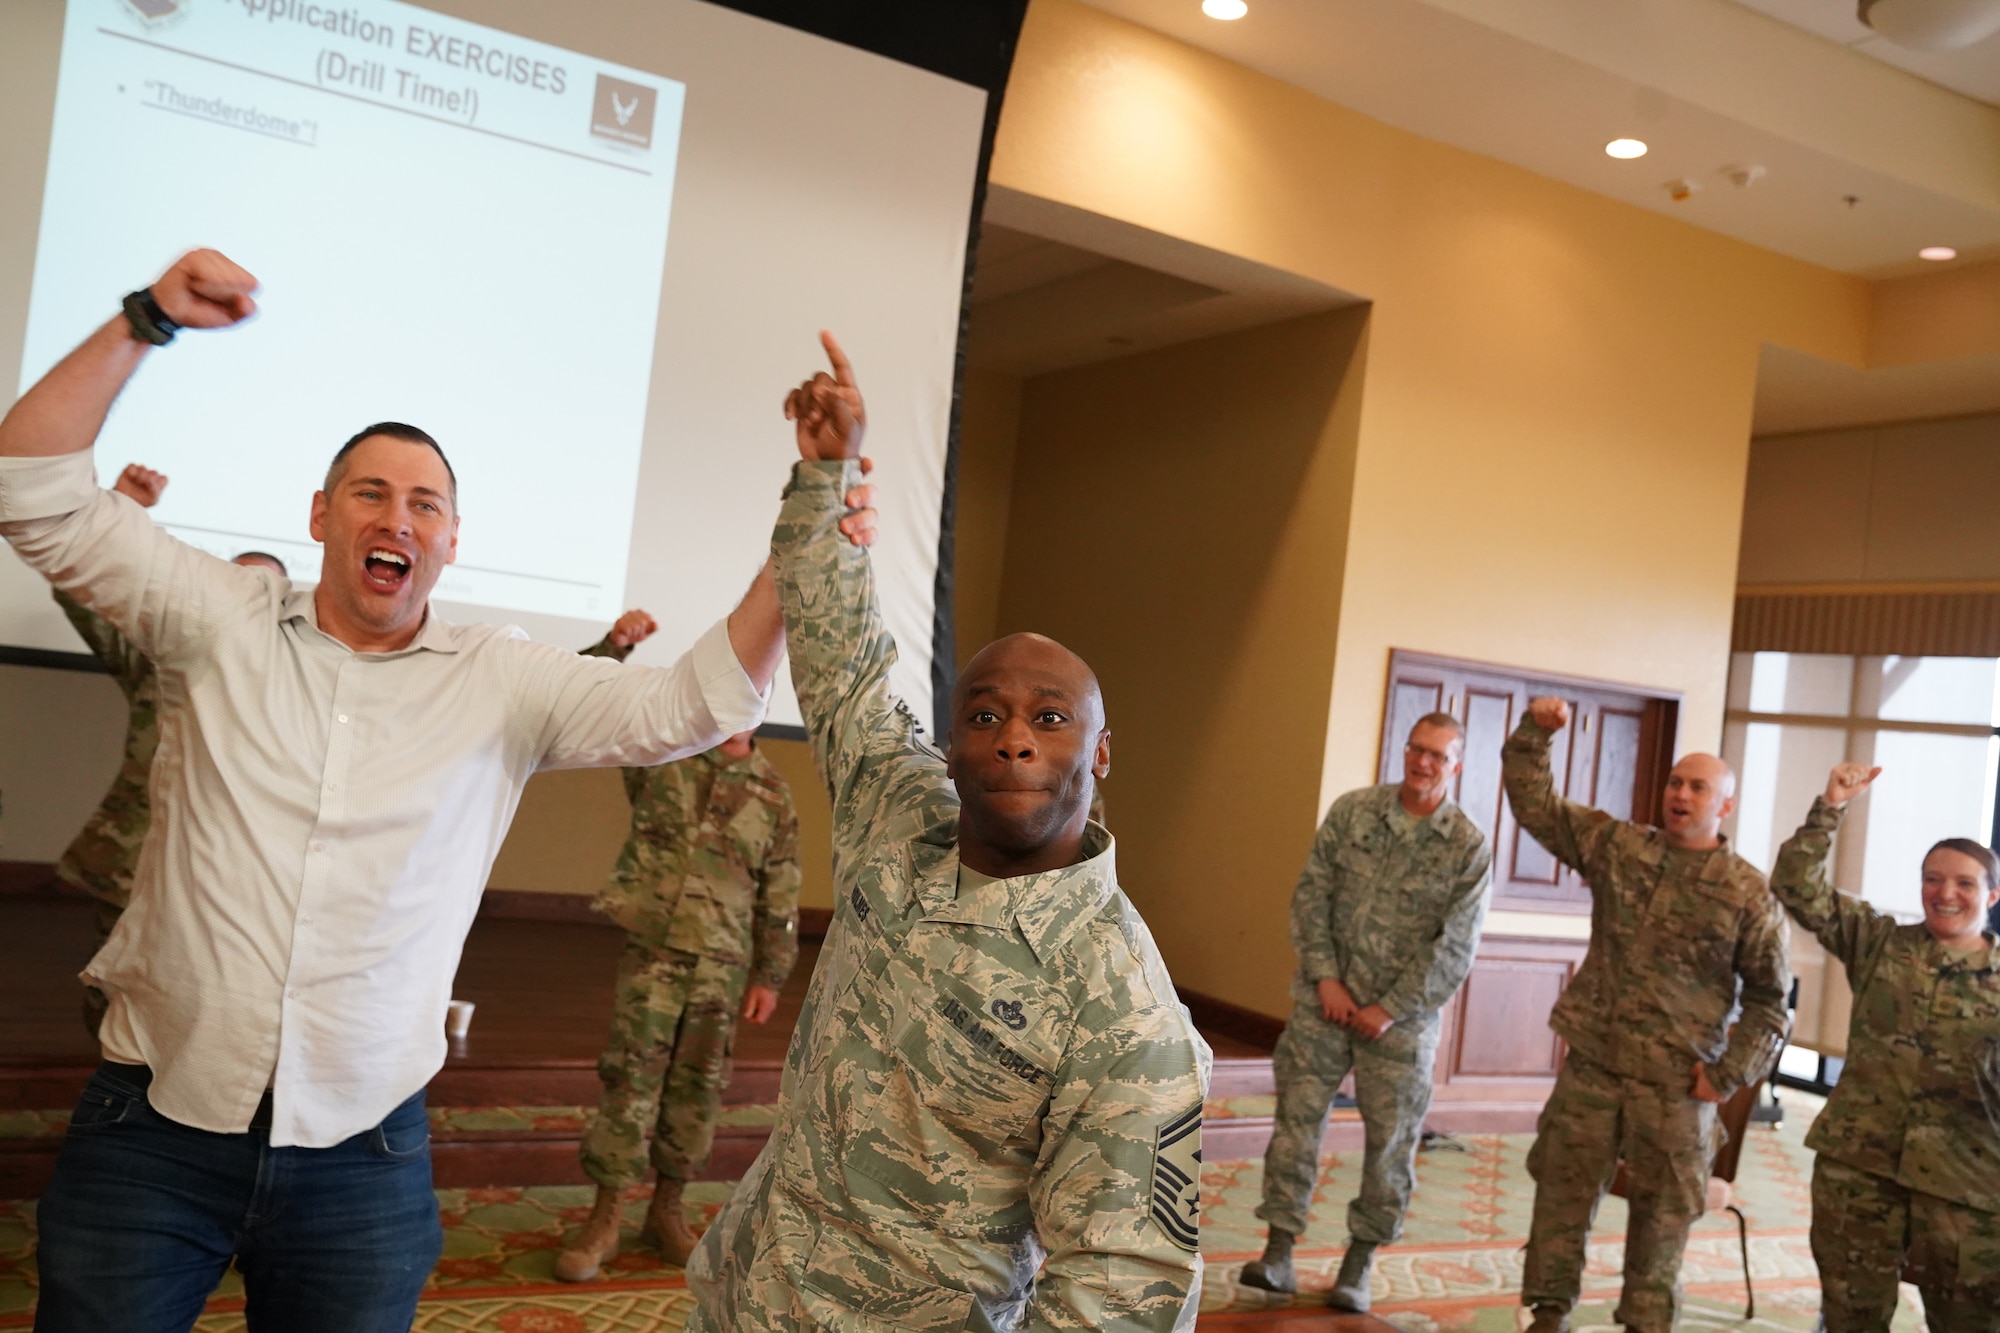 Senior Master Sgt. Patrick Holmes, 335th Training Squadron first sergeant, participates in the Improv to Improve course in the Bay Breeze Event Center at Keesler Air Force Base, Mississippi, Dec. 10, 2019. Improv to Improve is an improvisation comedy resiliency class that engages military members in a safe interactive learning environment. The purpose of the class is to help combat life stress and adversity in an unconventional way. (U.S. Air Force photo by Airman 1st Class Spencer Tobler)